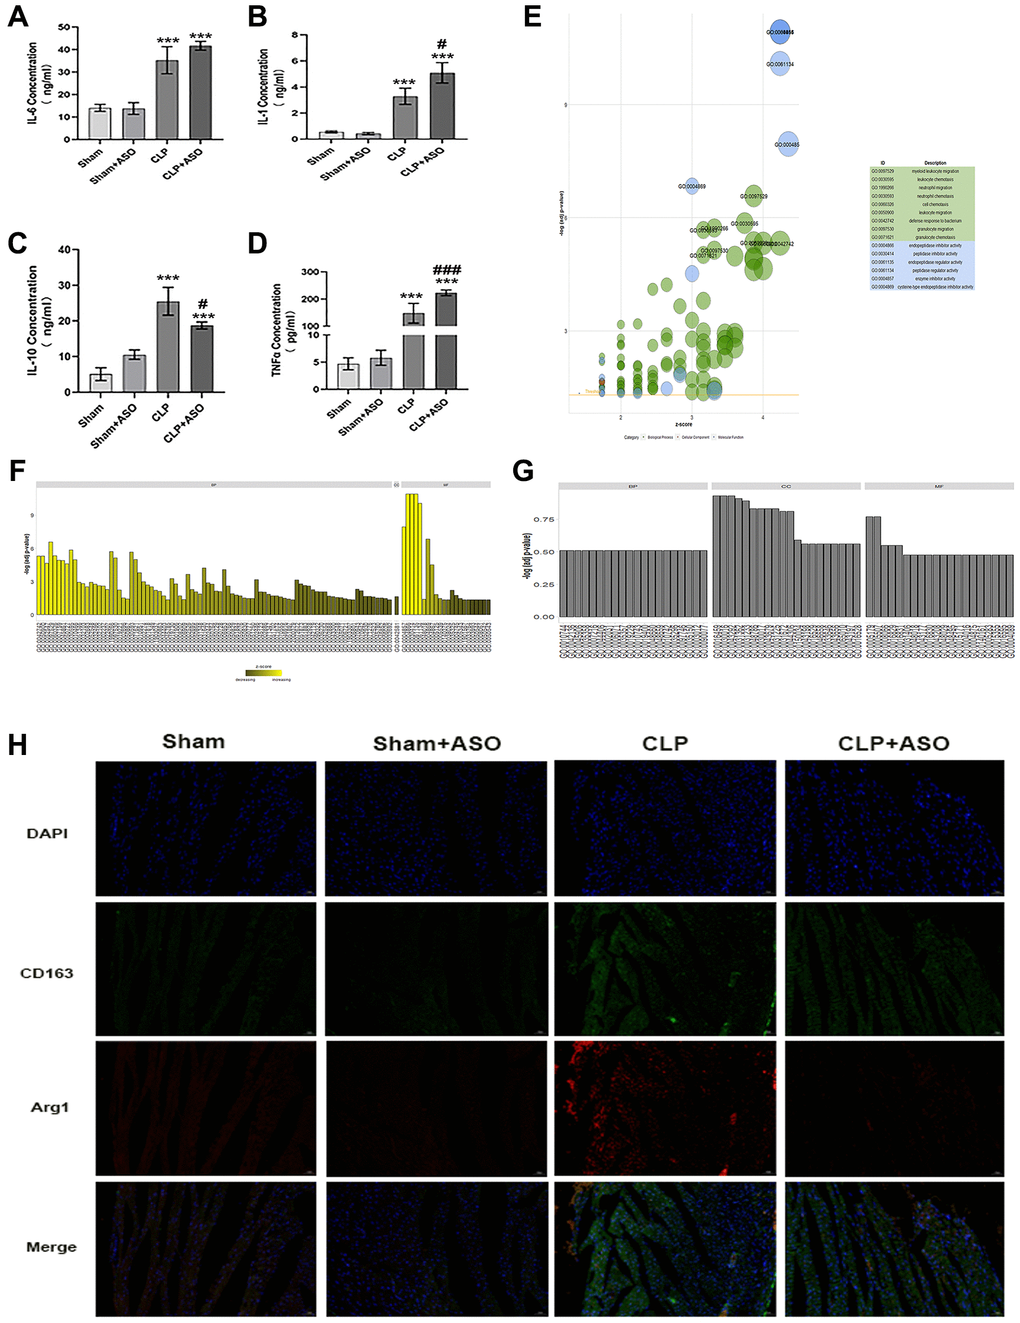 Inhibition of Hmgcs2 aggravates inflammatory response and reduces M2 macrophages in the heart of CLP mice. (A) The concentrations of the inflammatory factor IL-1β in the serum of mice in each group (ng/ml). (B) The concentration of IL-6 in the serum of mice in each group (ng/ml). (C) The concentration of IL-10 in the serum of mice in each group (ng/ml). (D) The concentrations of TNF-α in the serum of mice in each group (pg/ml). (E) GO enrichment results are exhibited in a bubble plot, with bubble size representing how many enriched genes are and different colors representing different kinds of GO units. (F) The bar graph exhibits the enrichment results for the up-regulated genes GO enrichment analysis results. (G) GO enrichment analysis results of down-regulated genes. (H) Immuno-fluorescence co-localization of heart samples from CLP mice. Where green fluorescence represents CD163, red fluorescence represents Arg1, blue represents nuclei (DAPI), and the bottom is a composite (merge) diagram (magnification 400×). Sham: sham group (n = 6); Sham + ASO: sham surgery plus ASO administration group (n = 6); CLP: septic myocarditis model group in CLP operated mice (n = 6); CLP + ASO: CLP plus ASO administration group (n = 6). *P **P ***P #P ##P ###P 